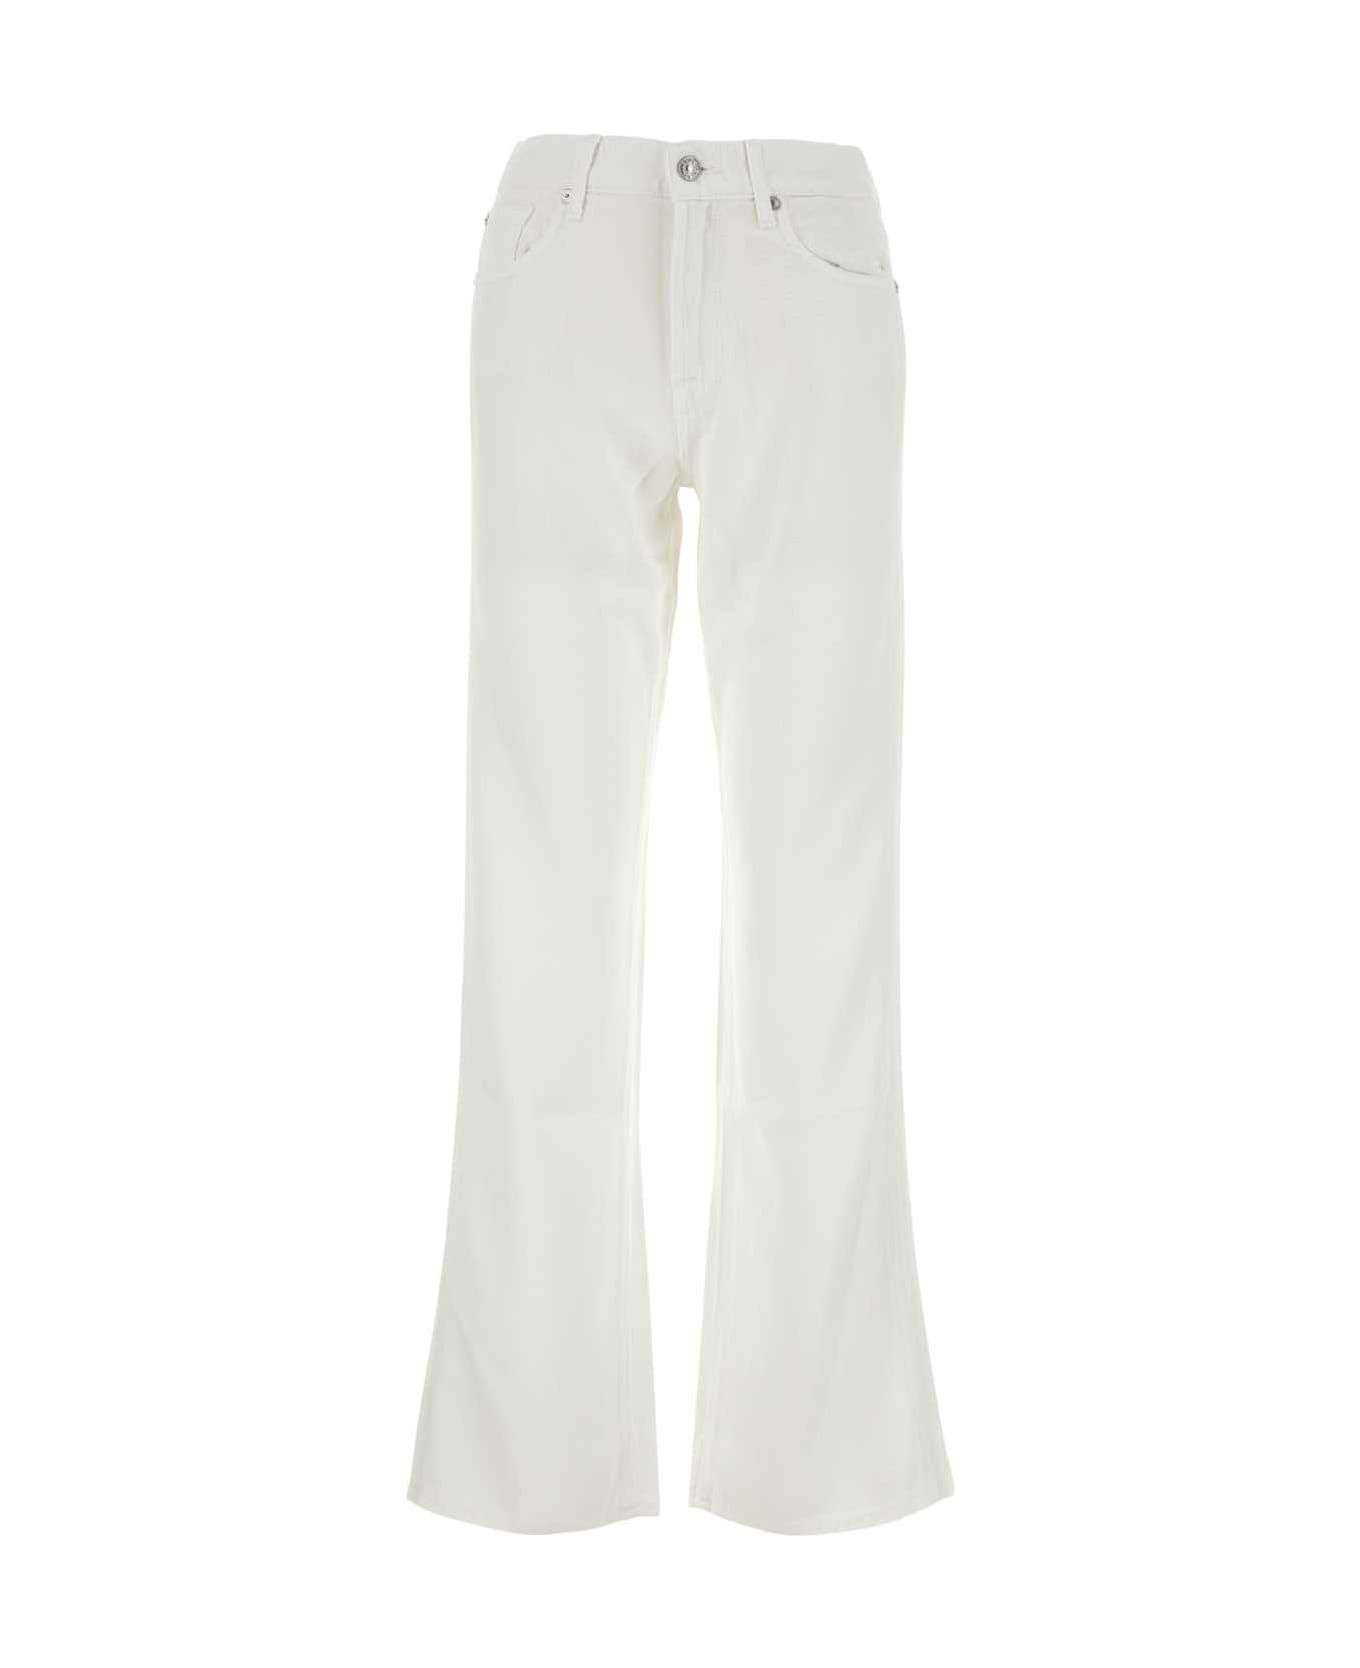 7 For All Mankind White Lyocell Tess Pant - BIANCO